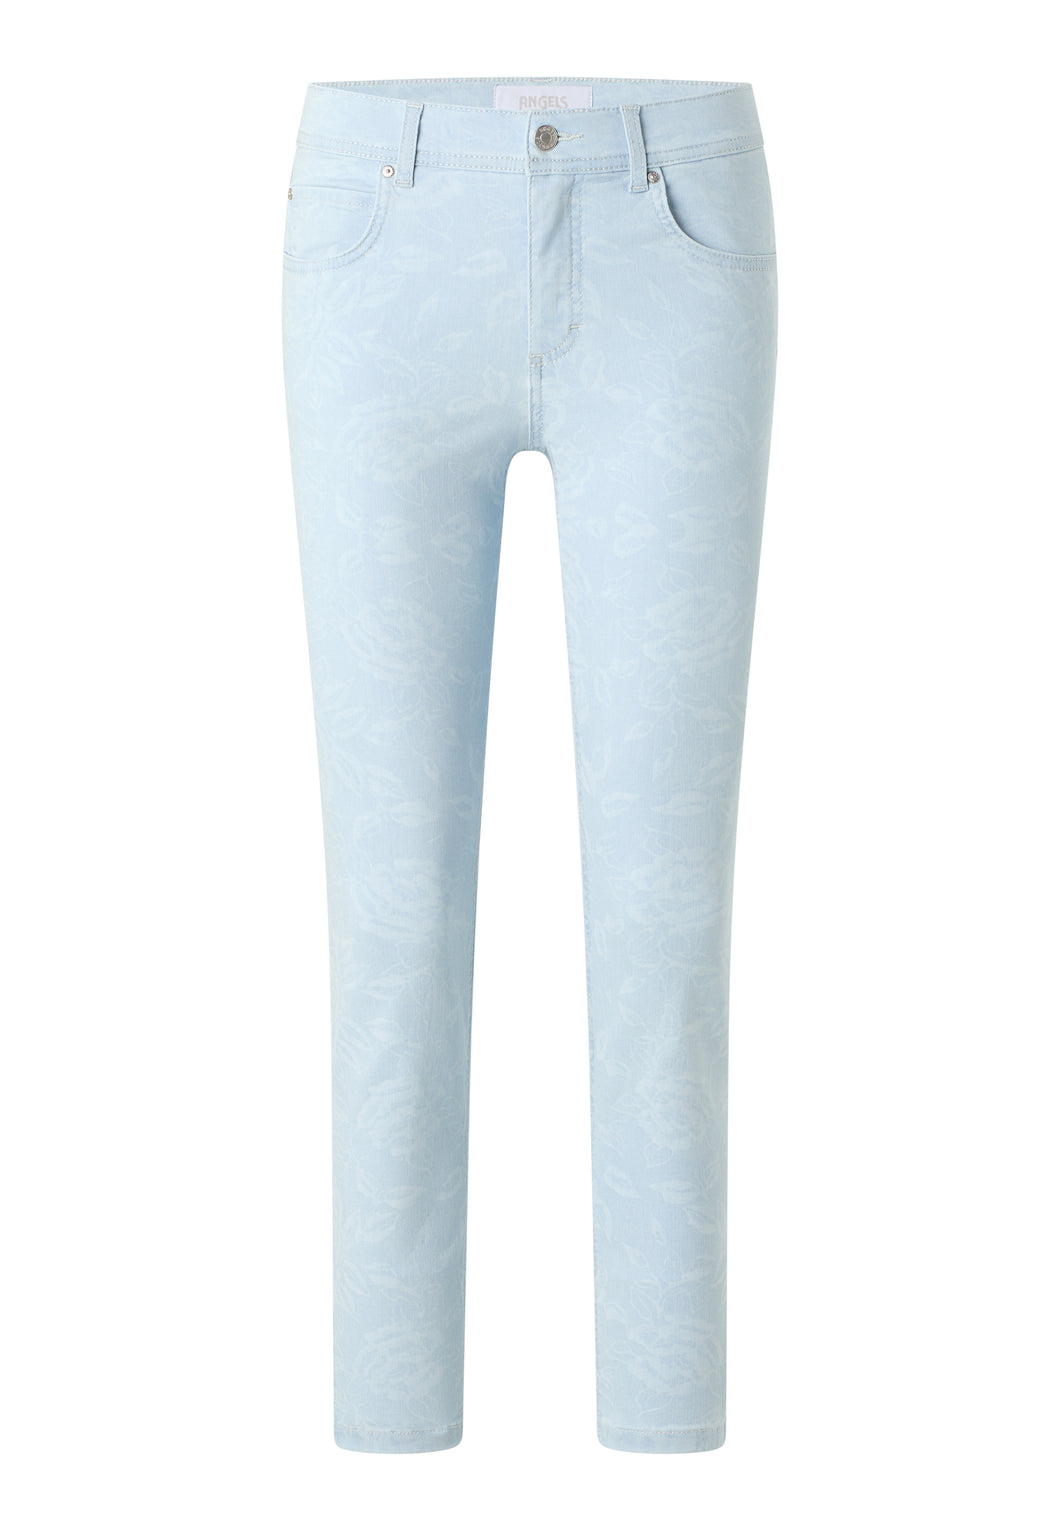 ANGELS JEANS ORNELLA bleached blue